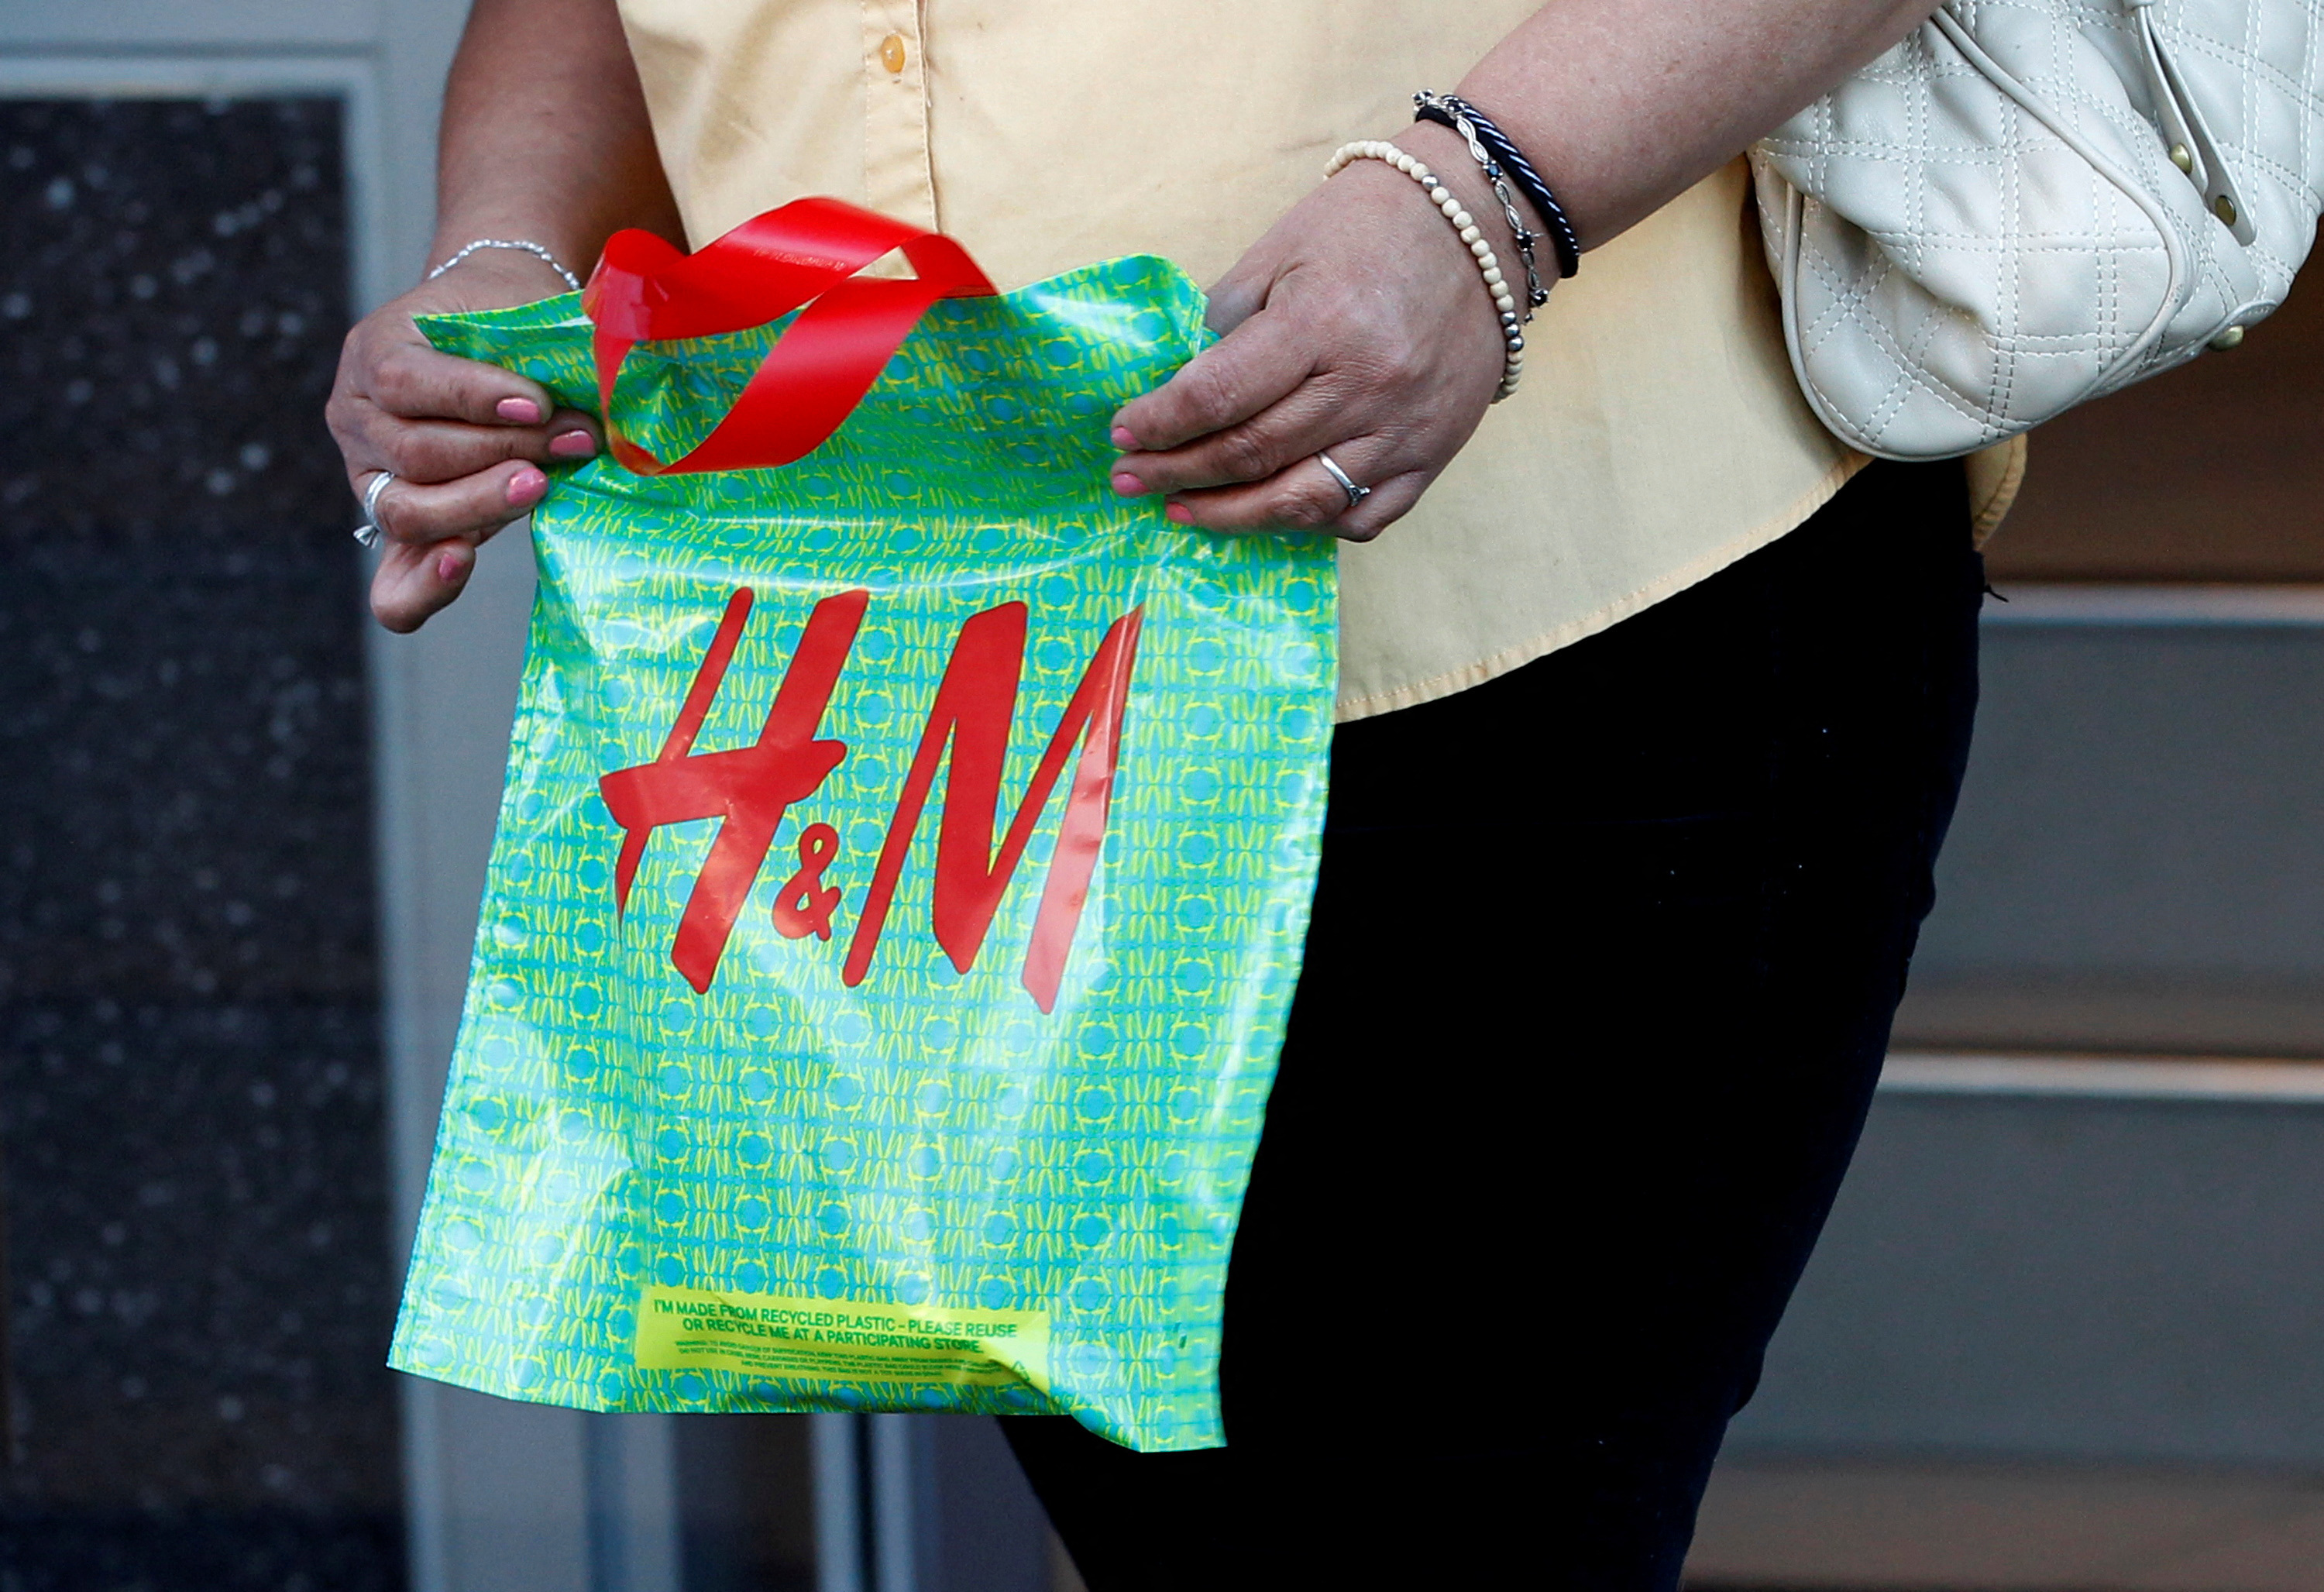 Under pressure from Shein, H&M reaches for upmarket shoppers